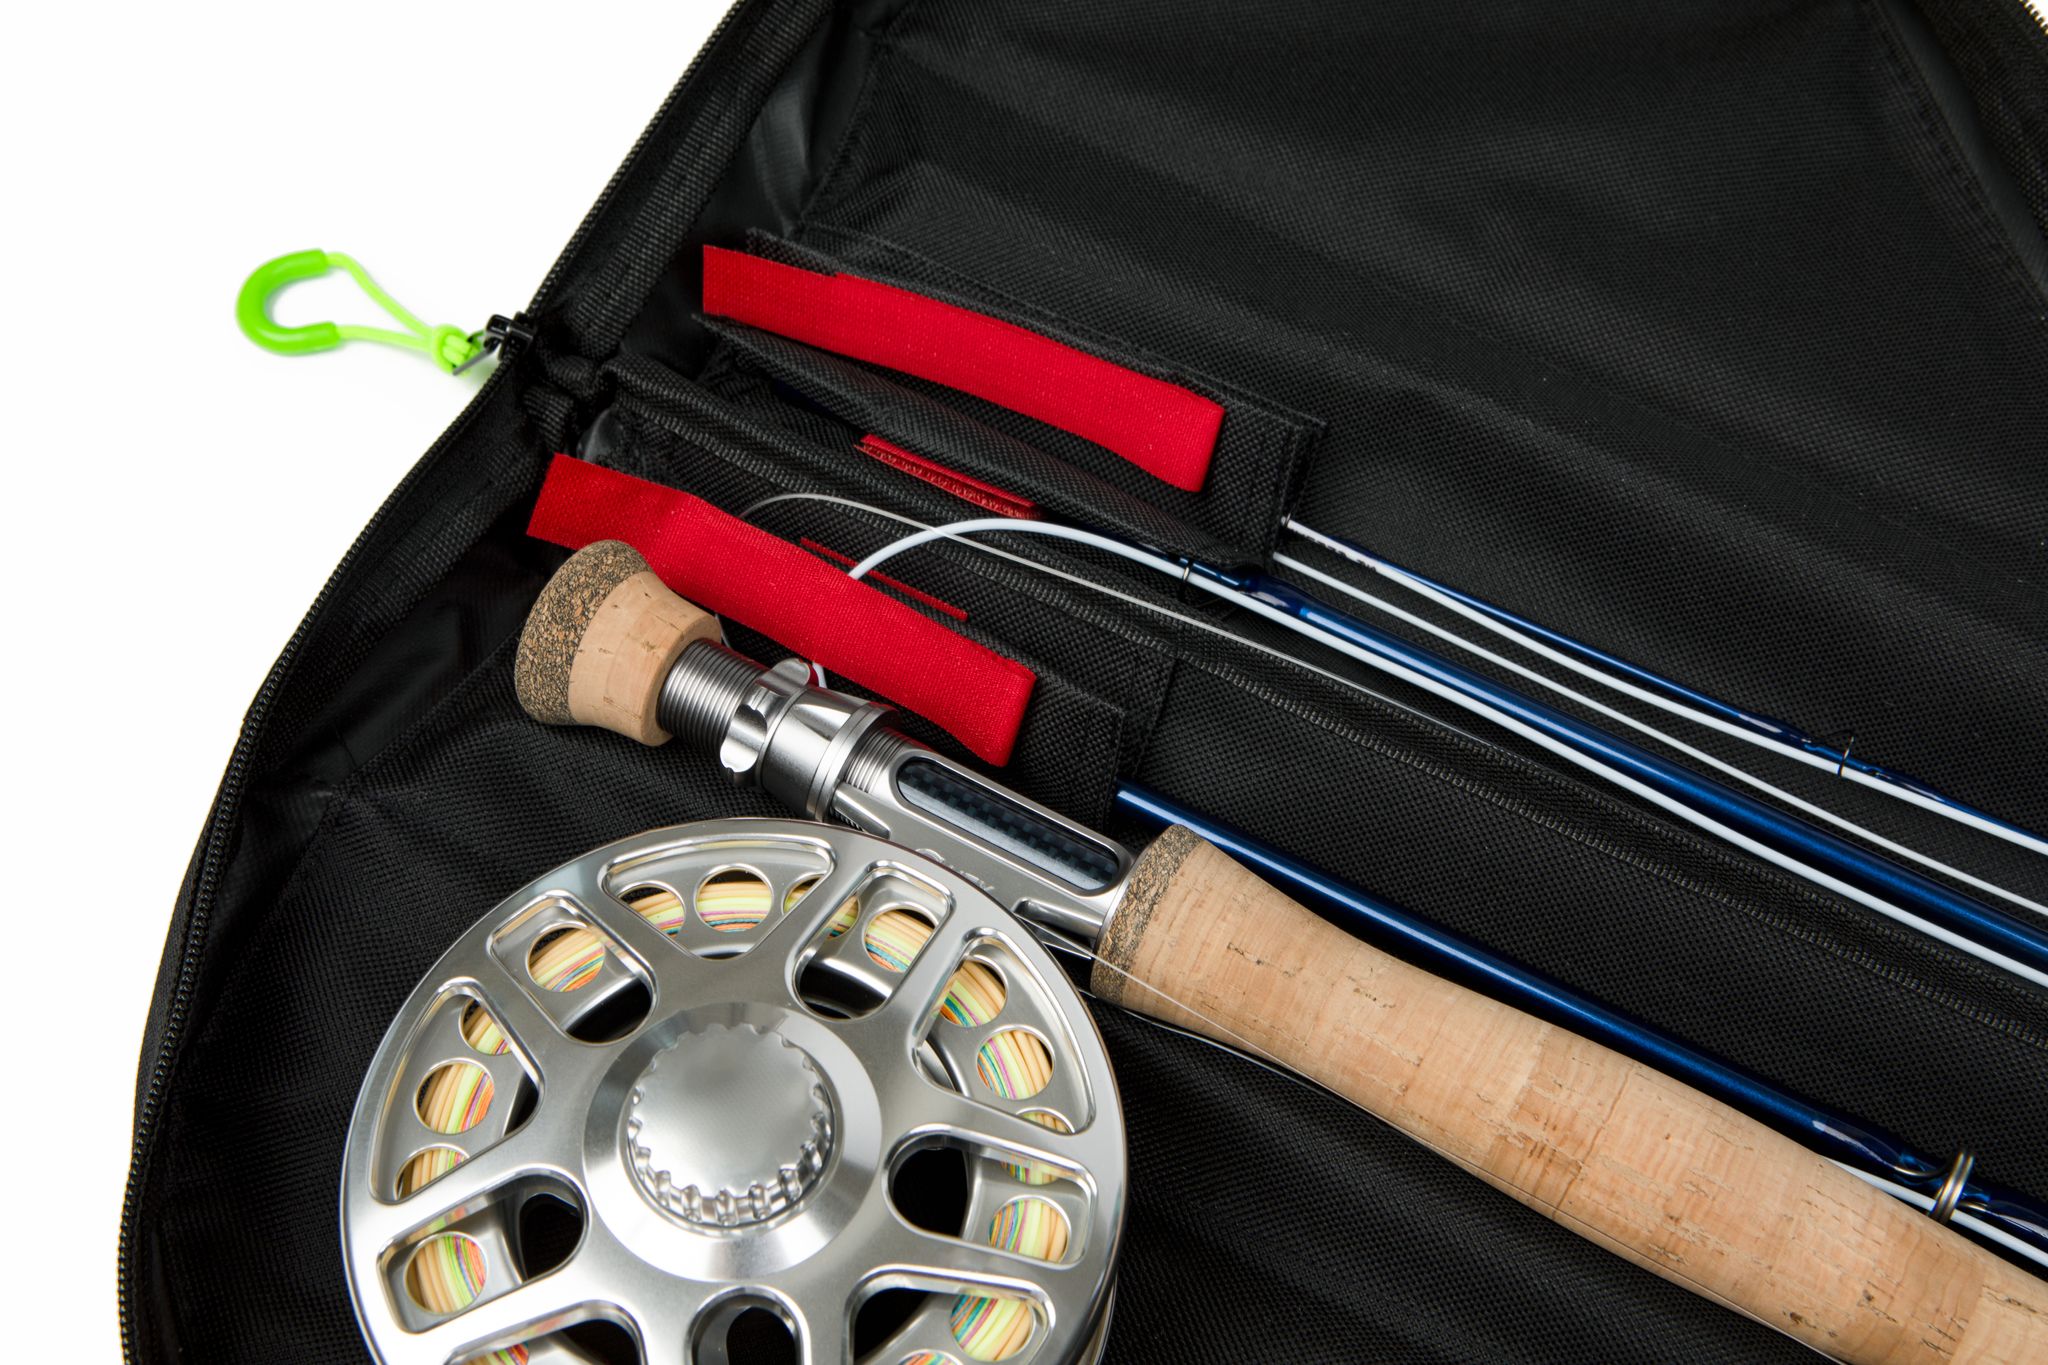 34 XD Series Rigged Fly Rod Case